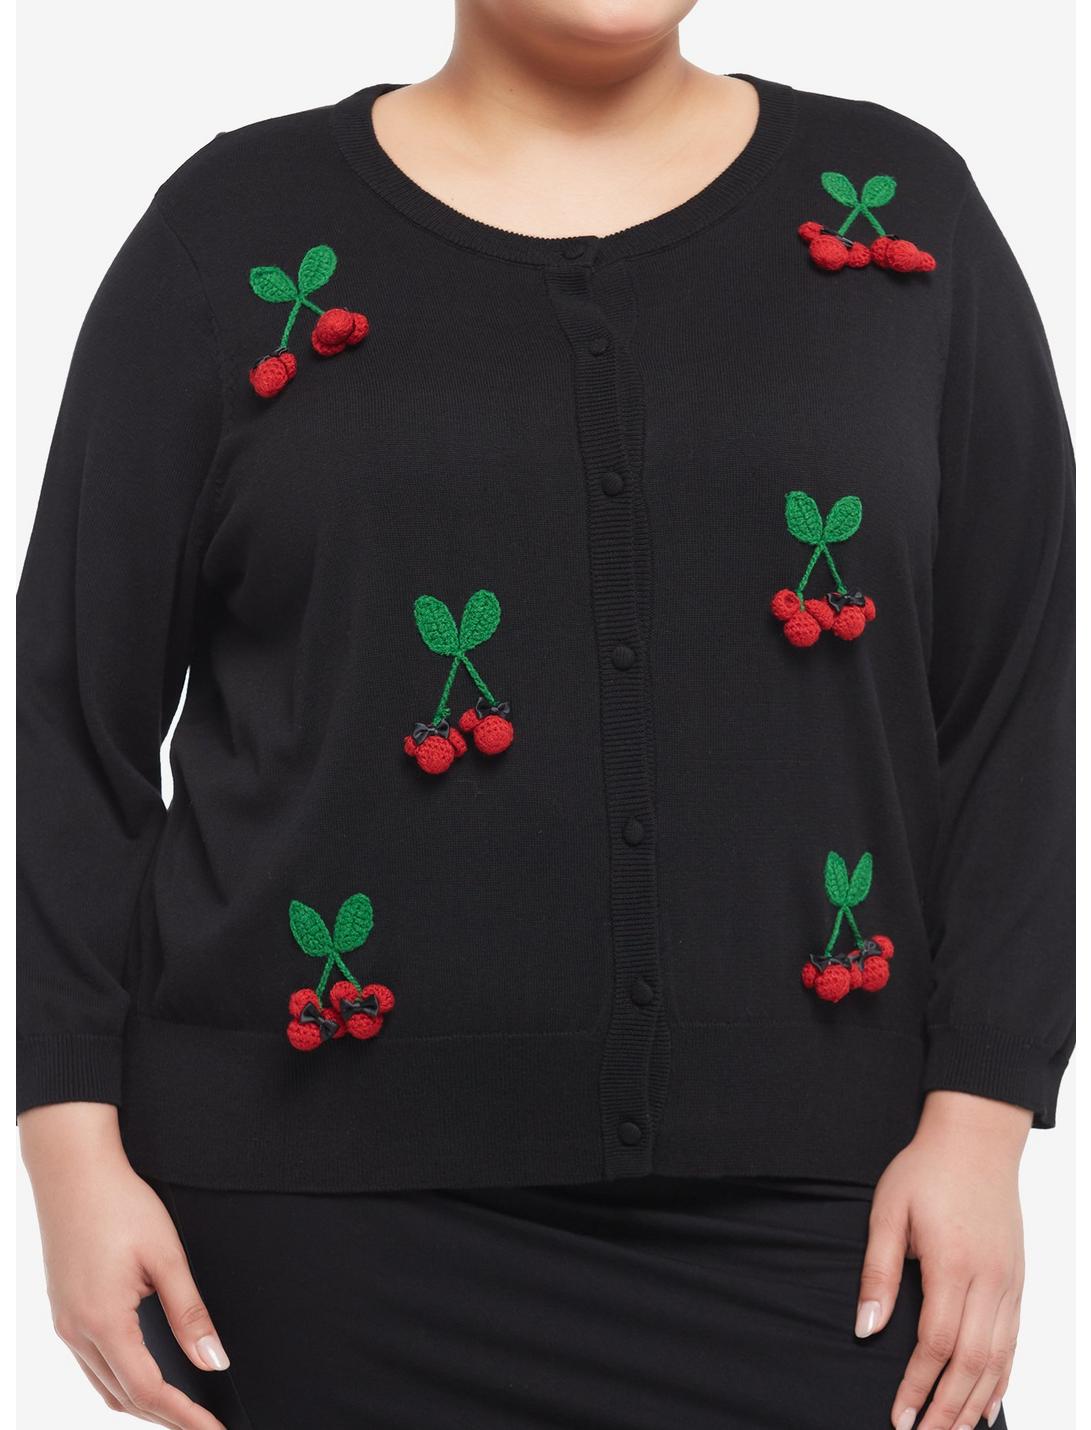 Her Universe Disney Minnie Mouse Knit Cherry Cardigan Plus Size Her Universe Exclusive, MULTI, hi-res